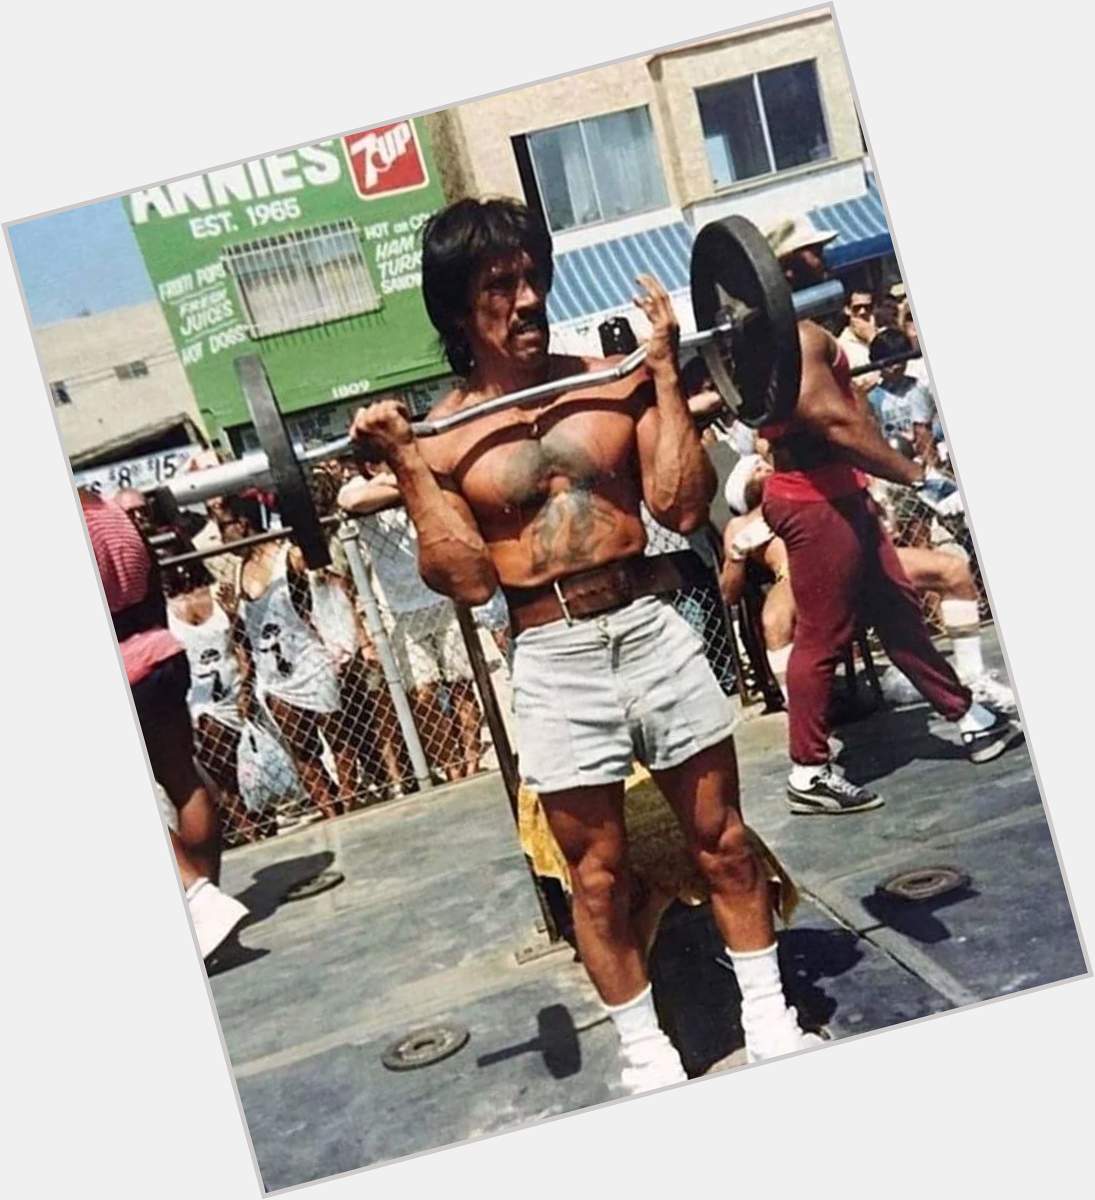 Happy birthday, Danny Trejo - here he is at Muscle Beach in the 1980s 